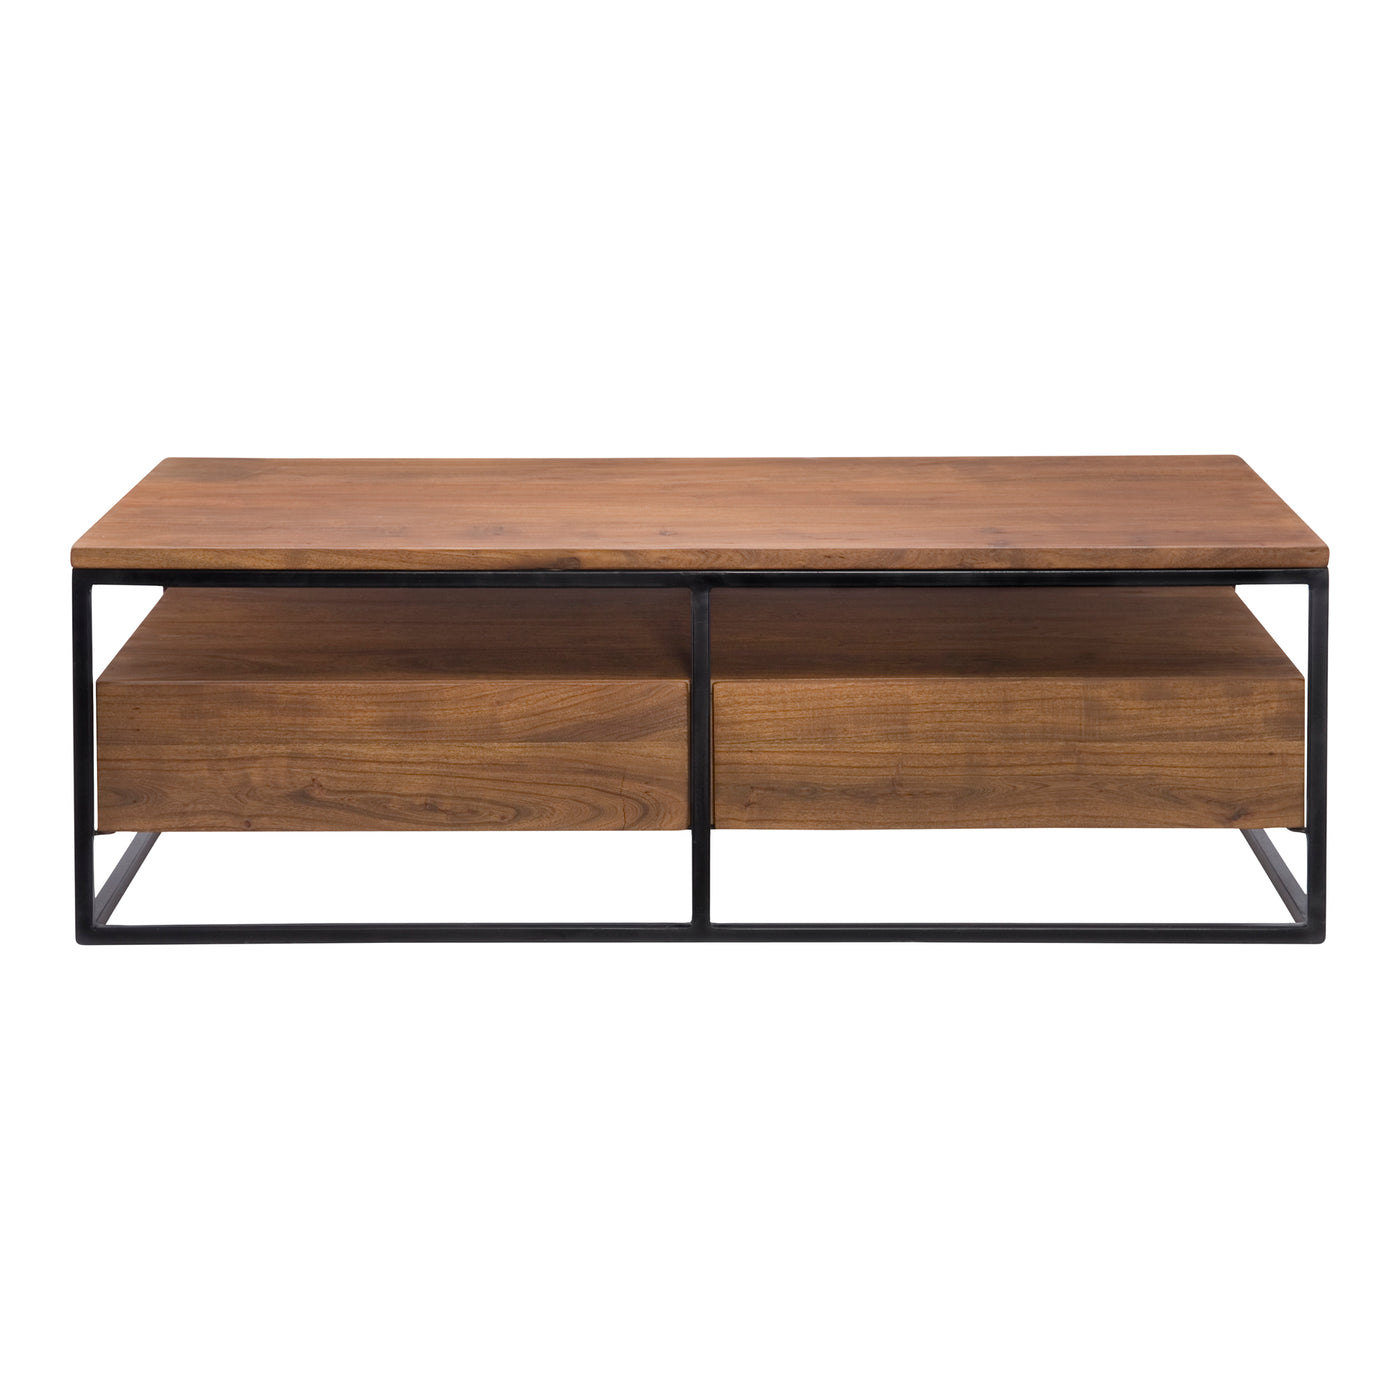 The Vancouver Coffee Table is a sleek contemporary style constructed with an iron frame and solid acacia wood mix. Its des...